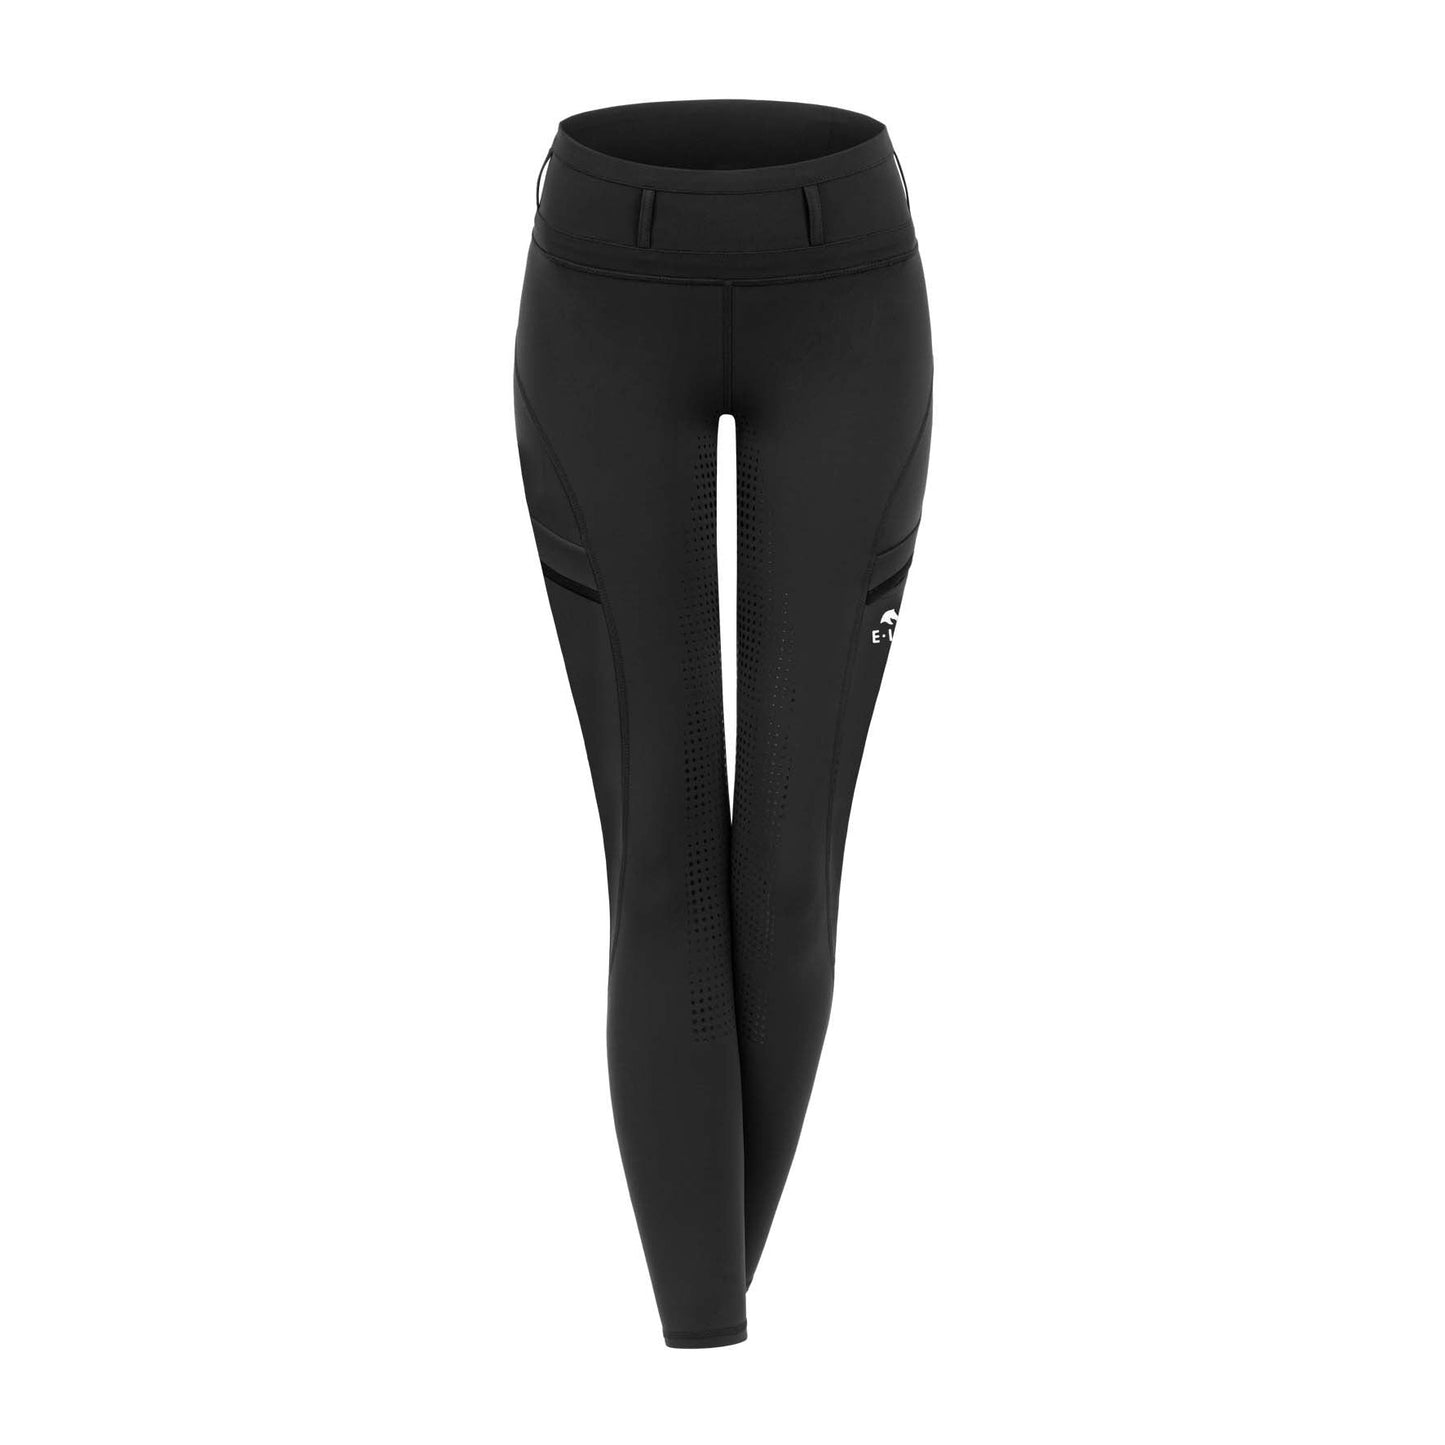 Black Horse Riding Tights with grip pattern on inner legs.